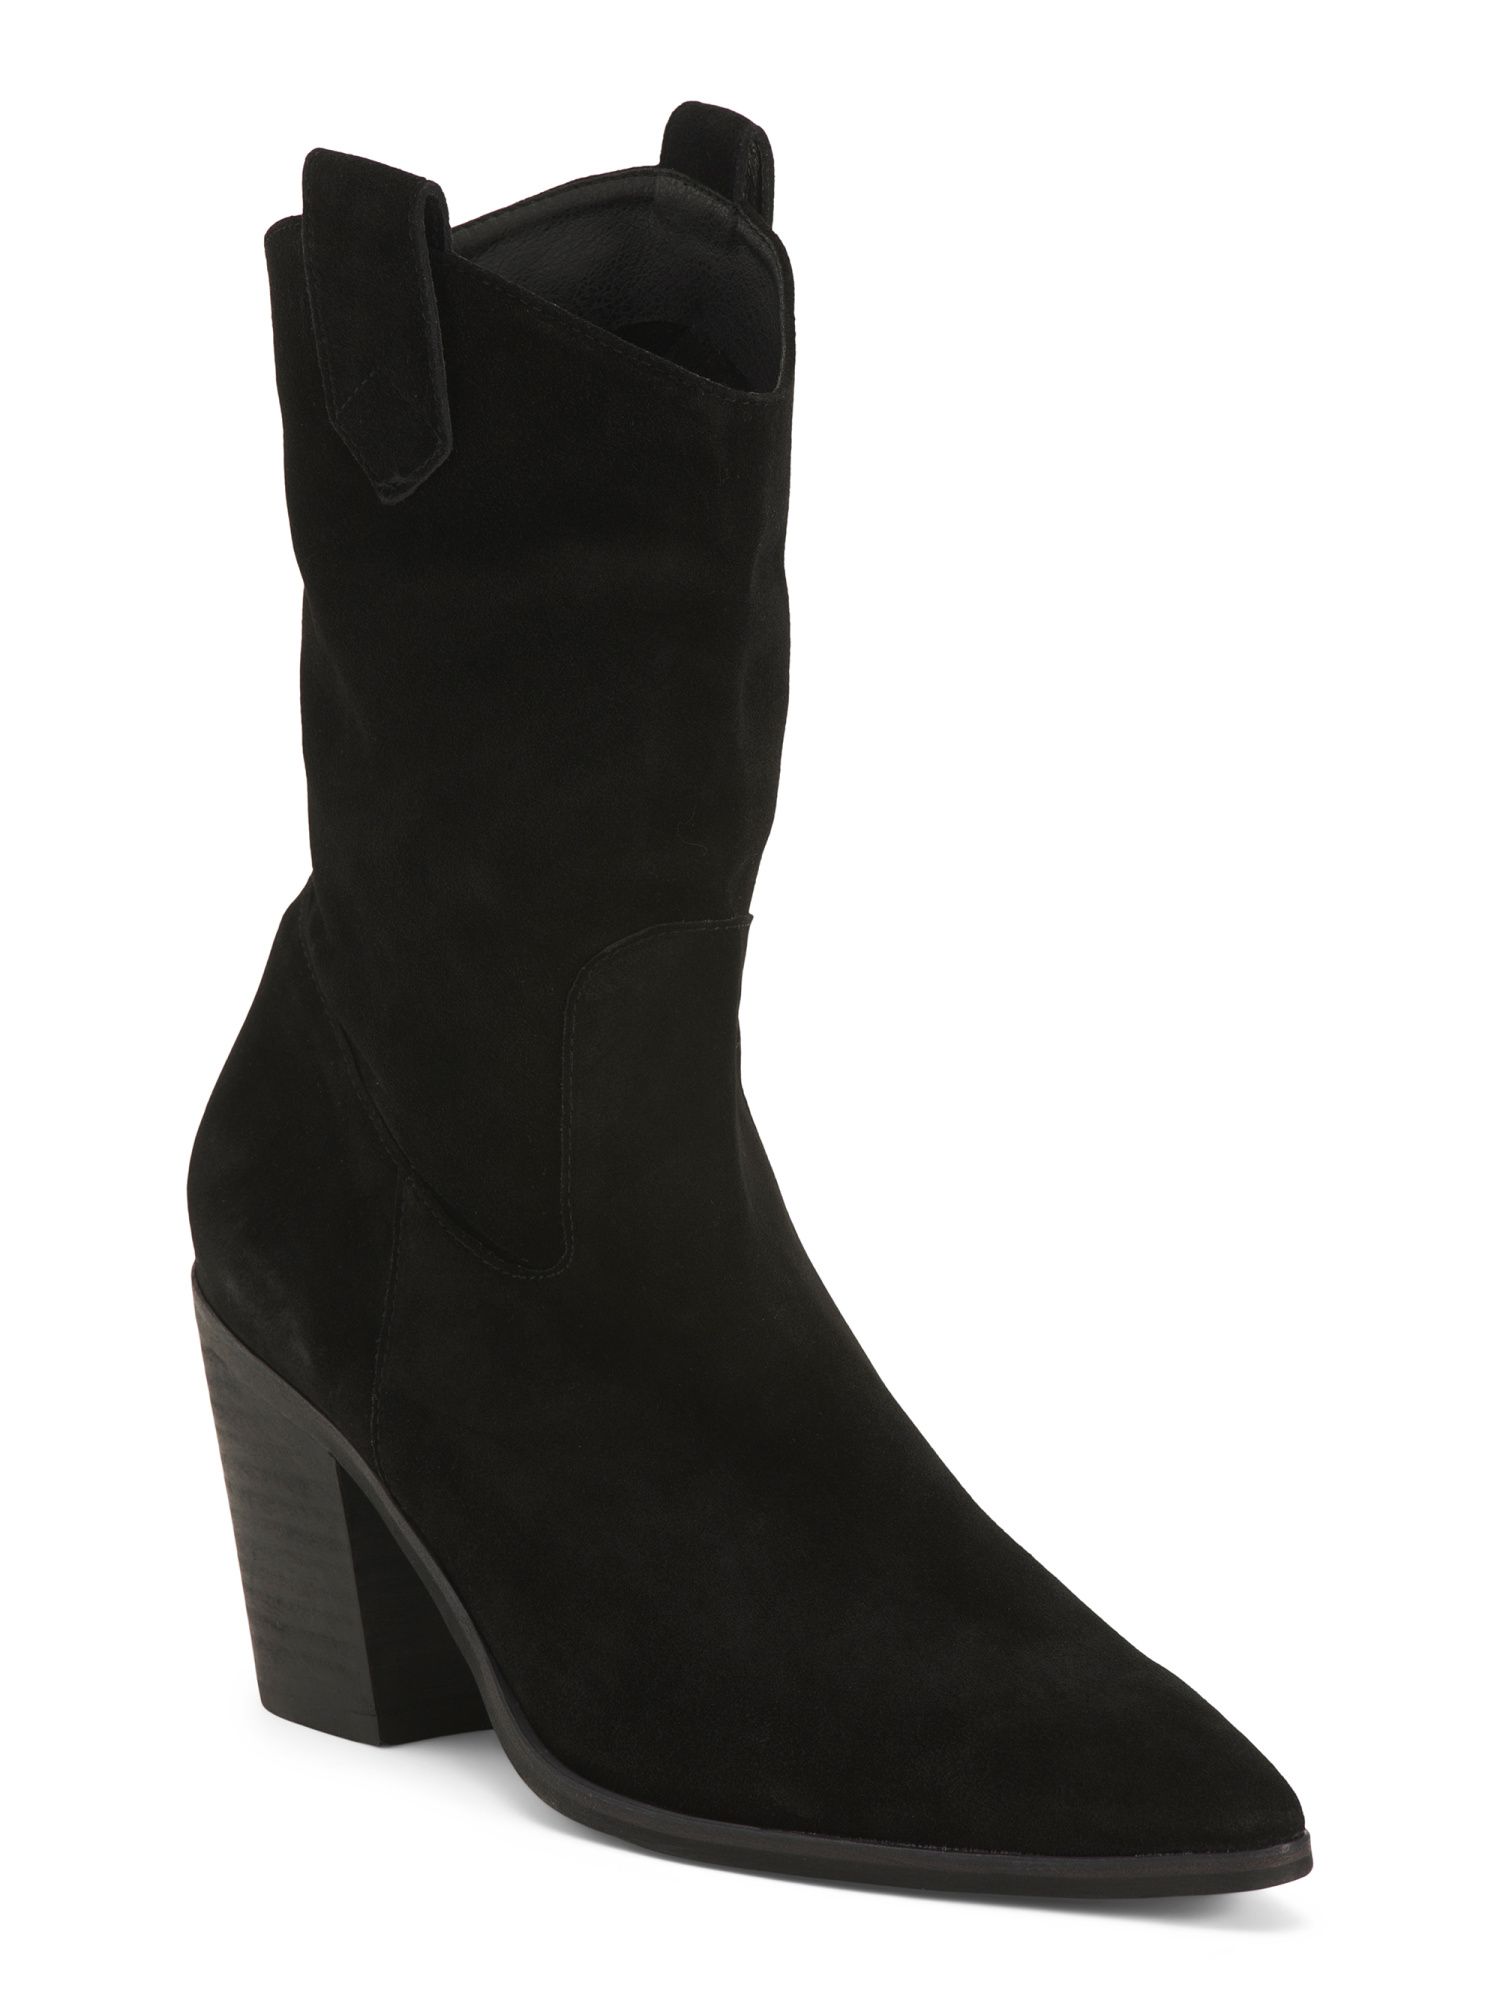 Munchy Suede Boots | Women's Shoes | Marshalls | Marshalls